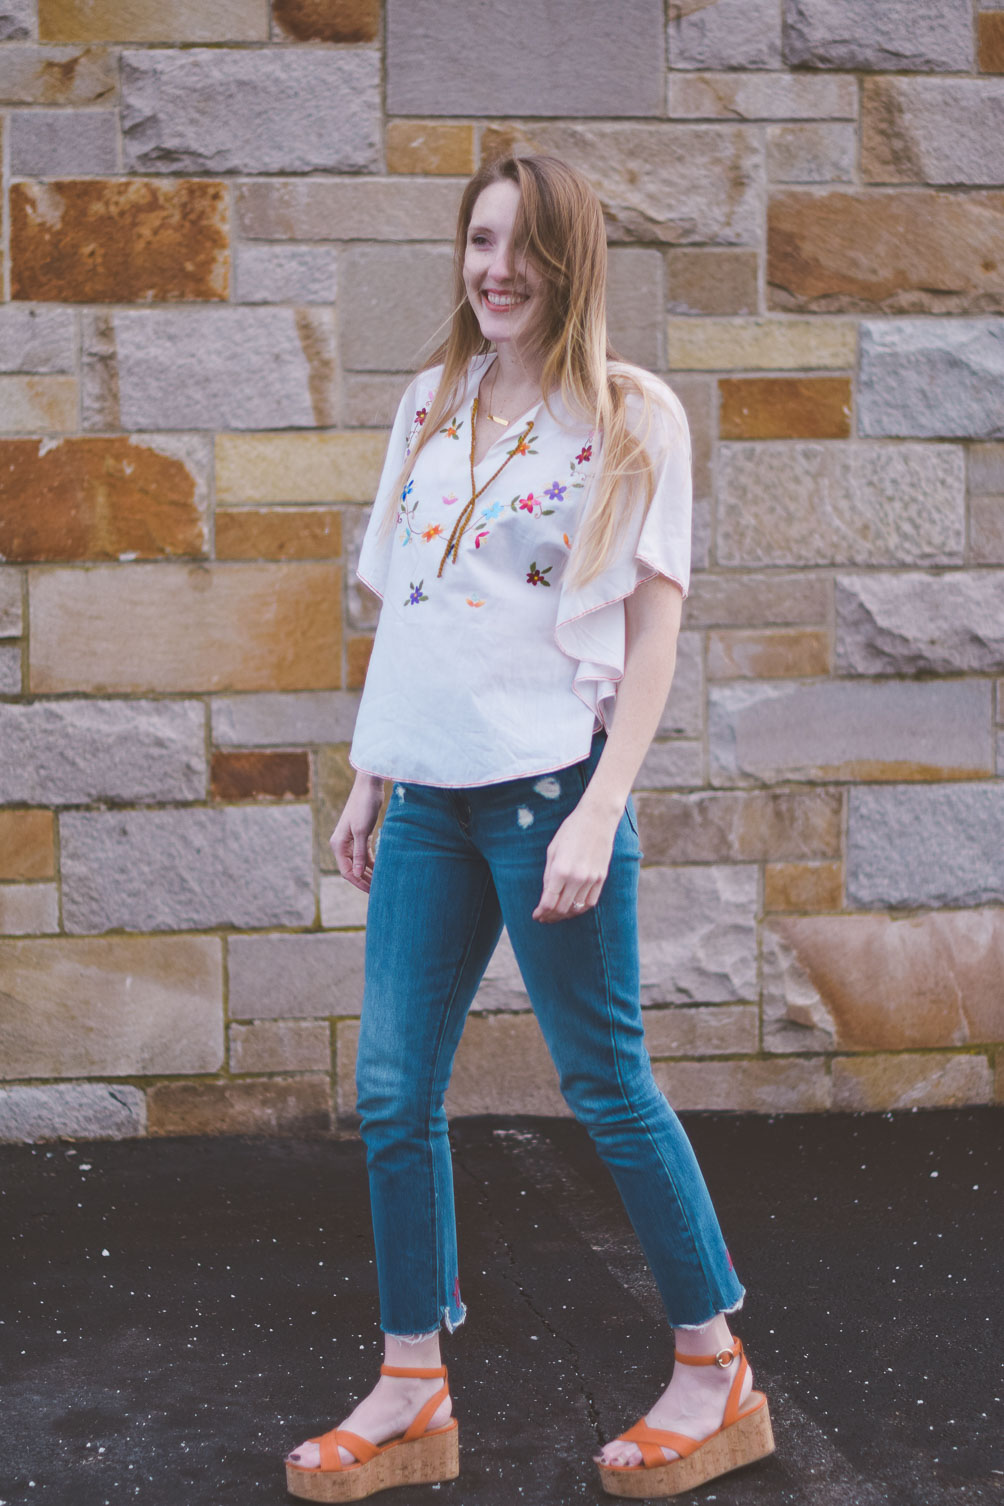 wearing an embroidered vintage top for spring with raw edge denim and cork platform sandals